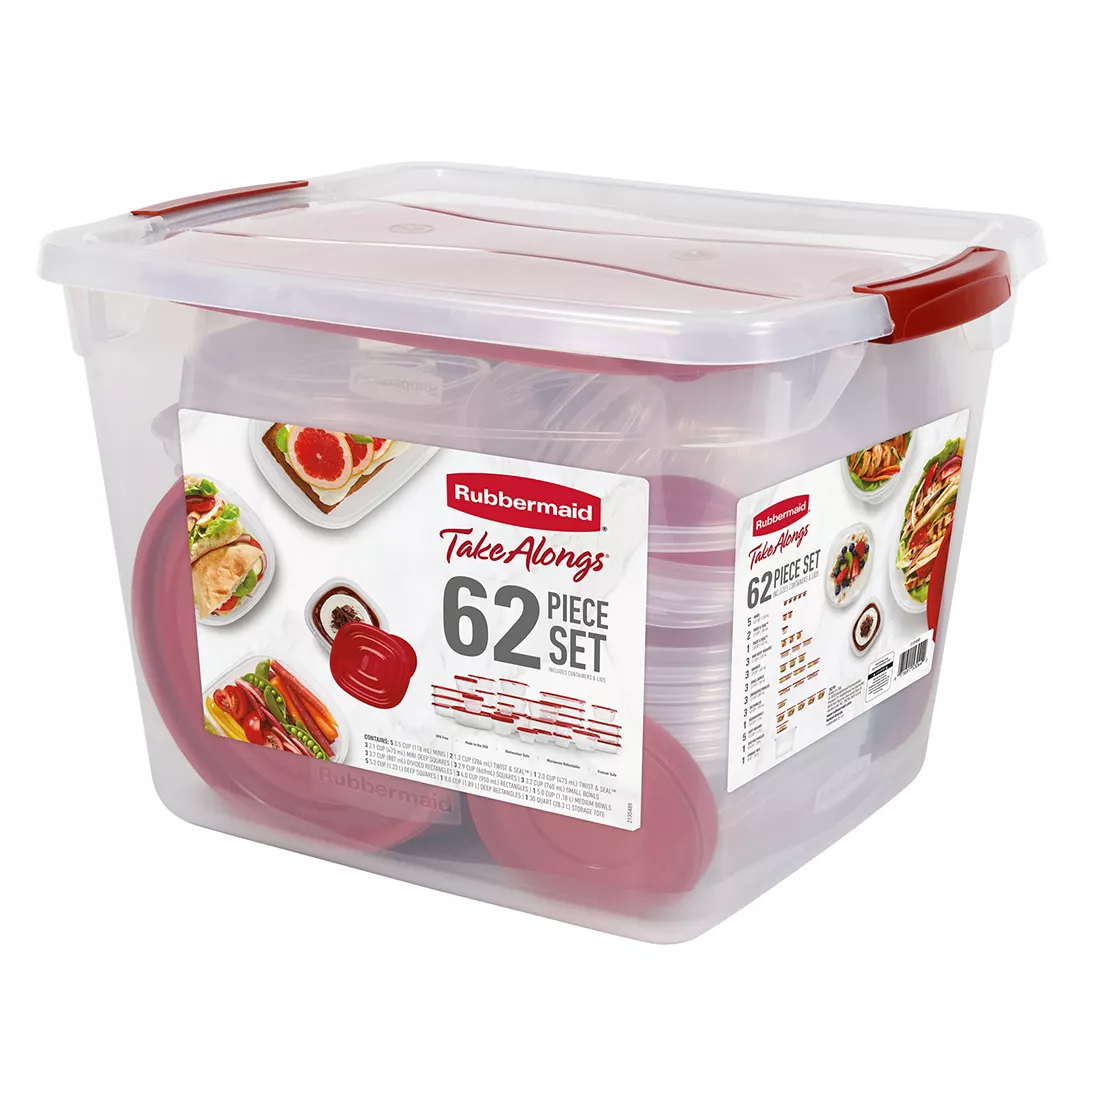 Rubbermaid Take Alongs Containers + Lids 5 cup